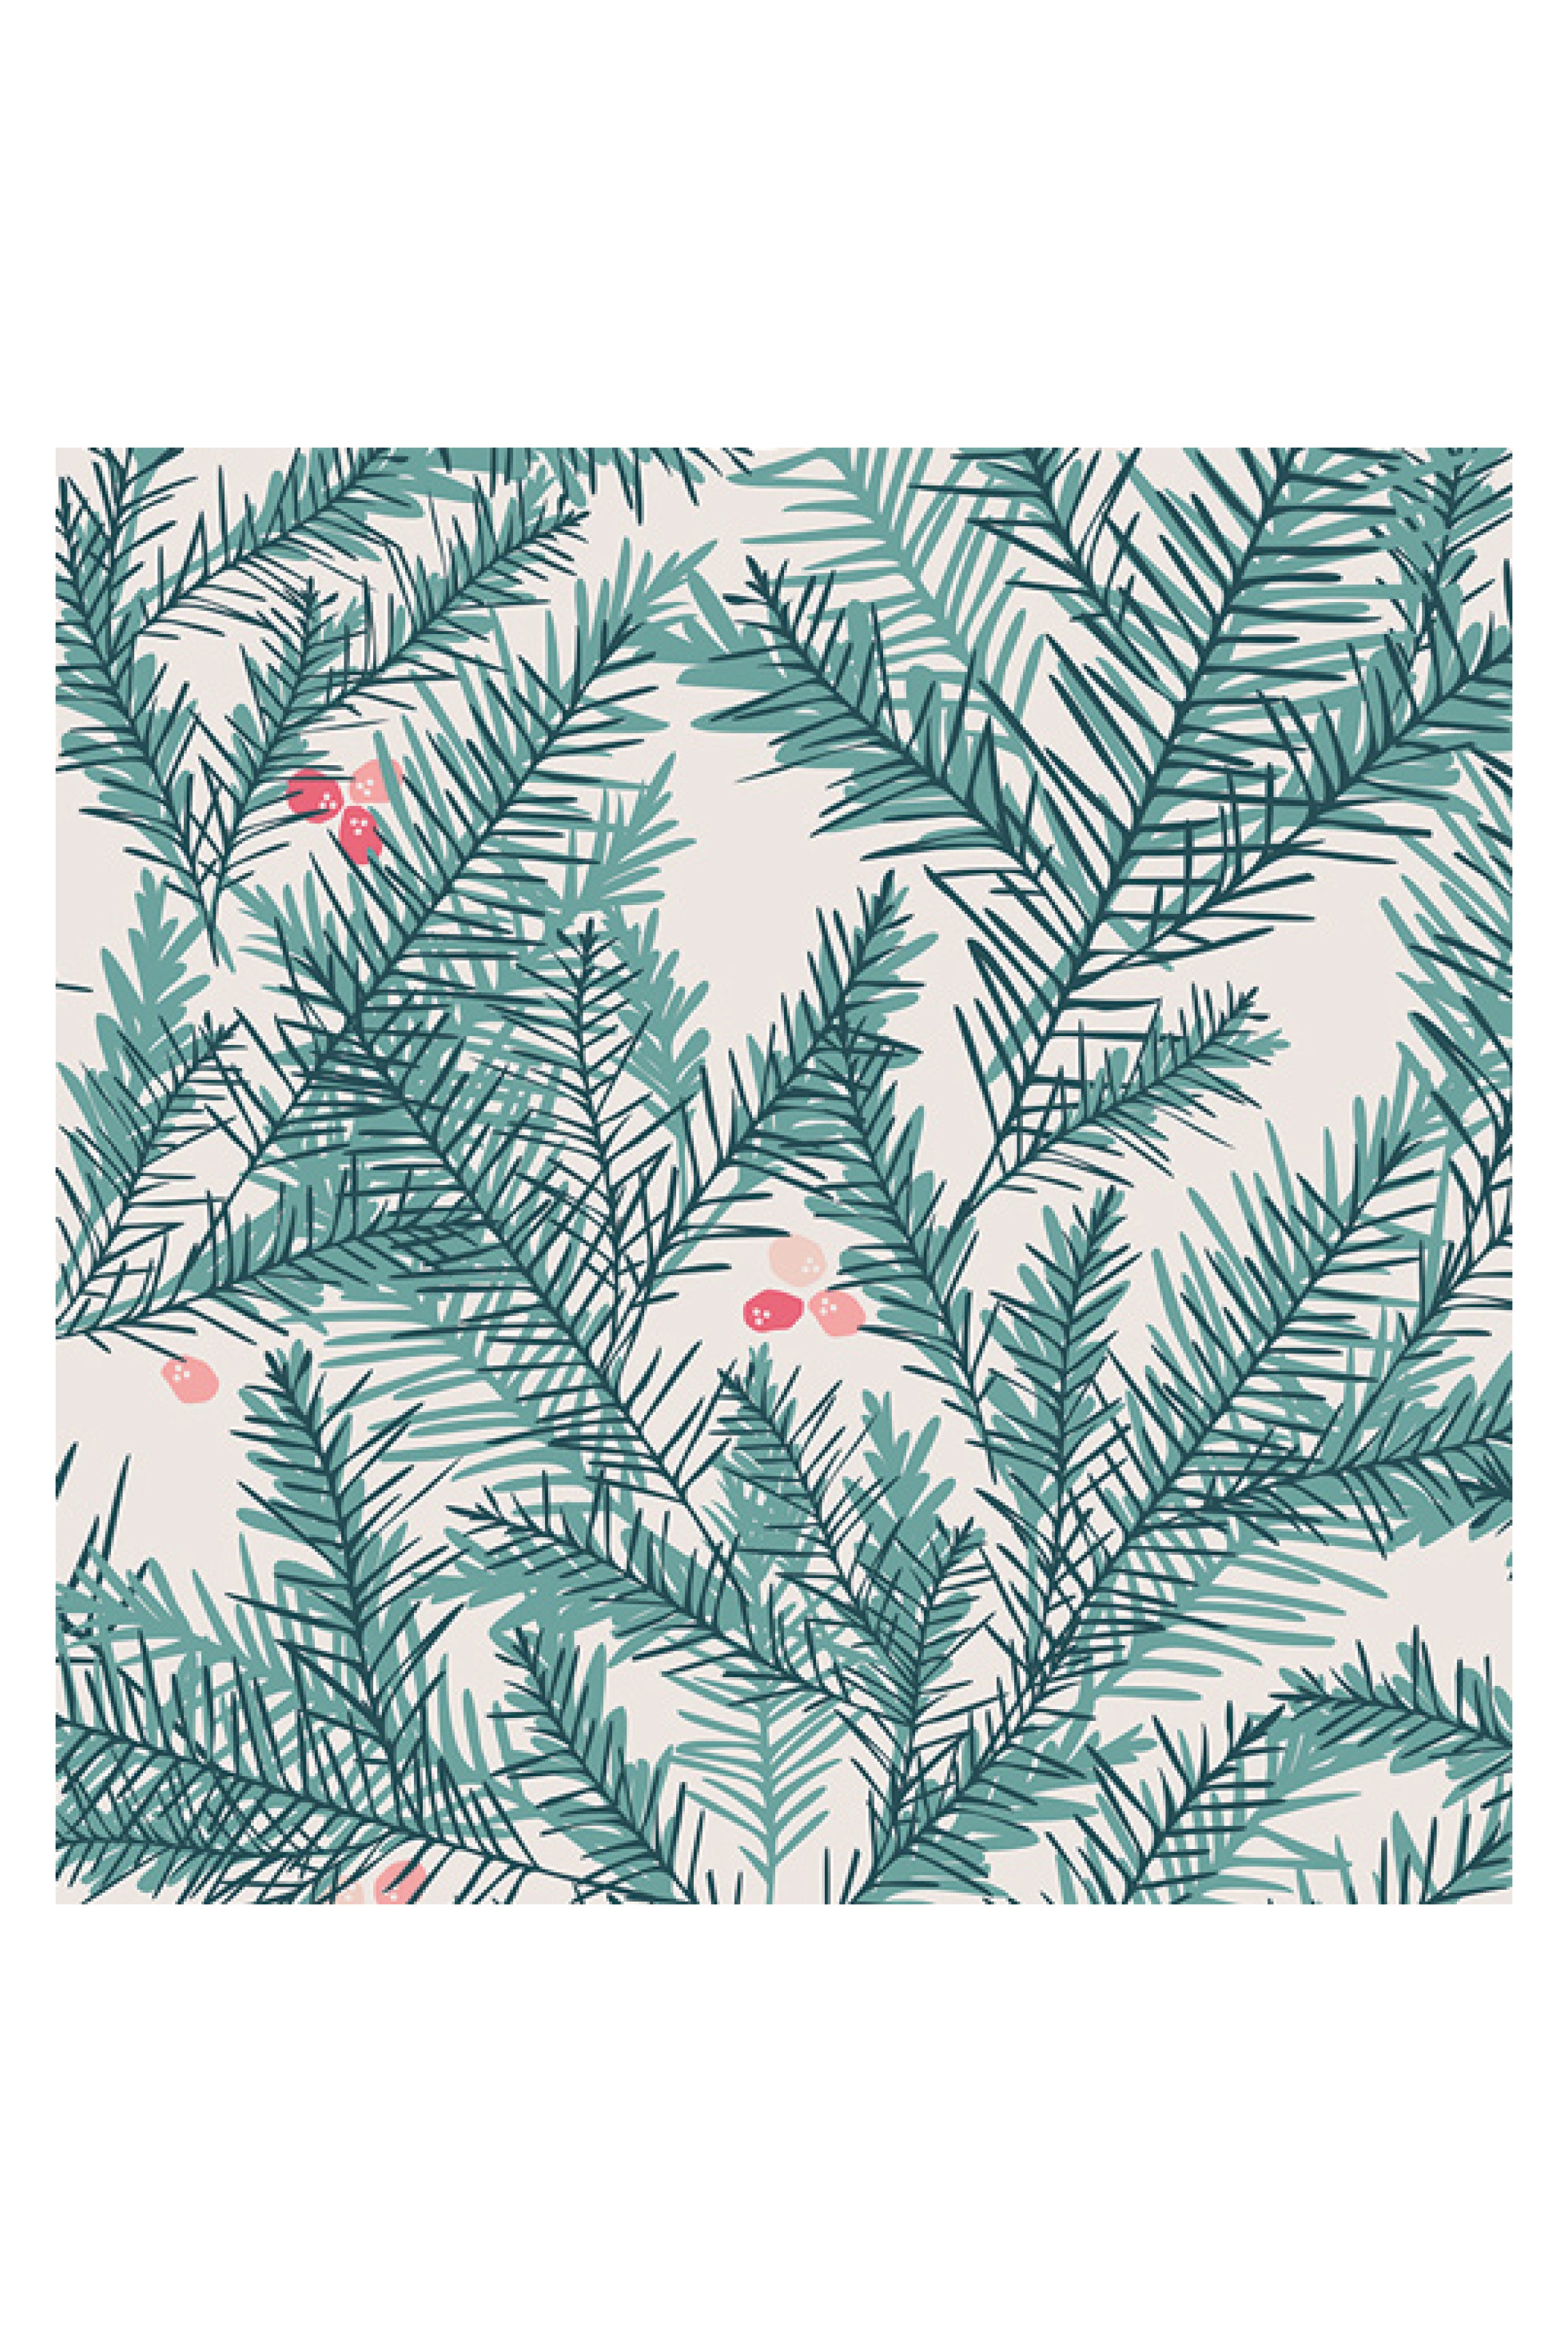 4.5 yards backing - Be Merry